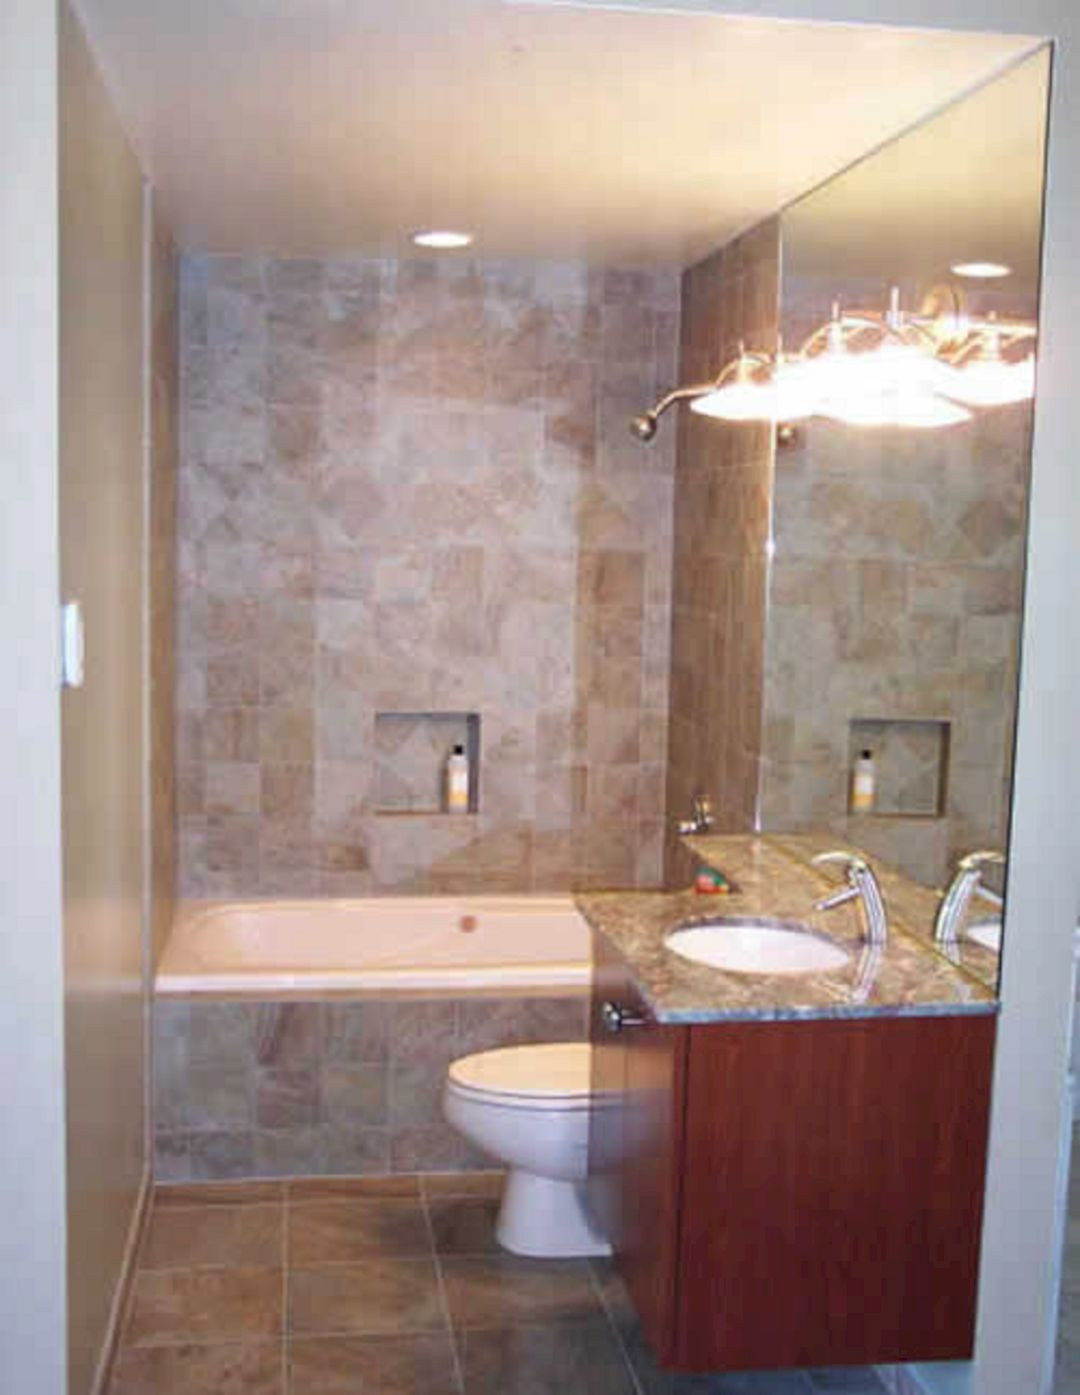 Very Small Bathroom Awesome Very Small Bathroom Ideas Very Small Bathroom Ideas